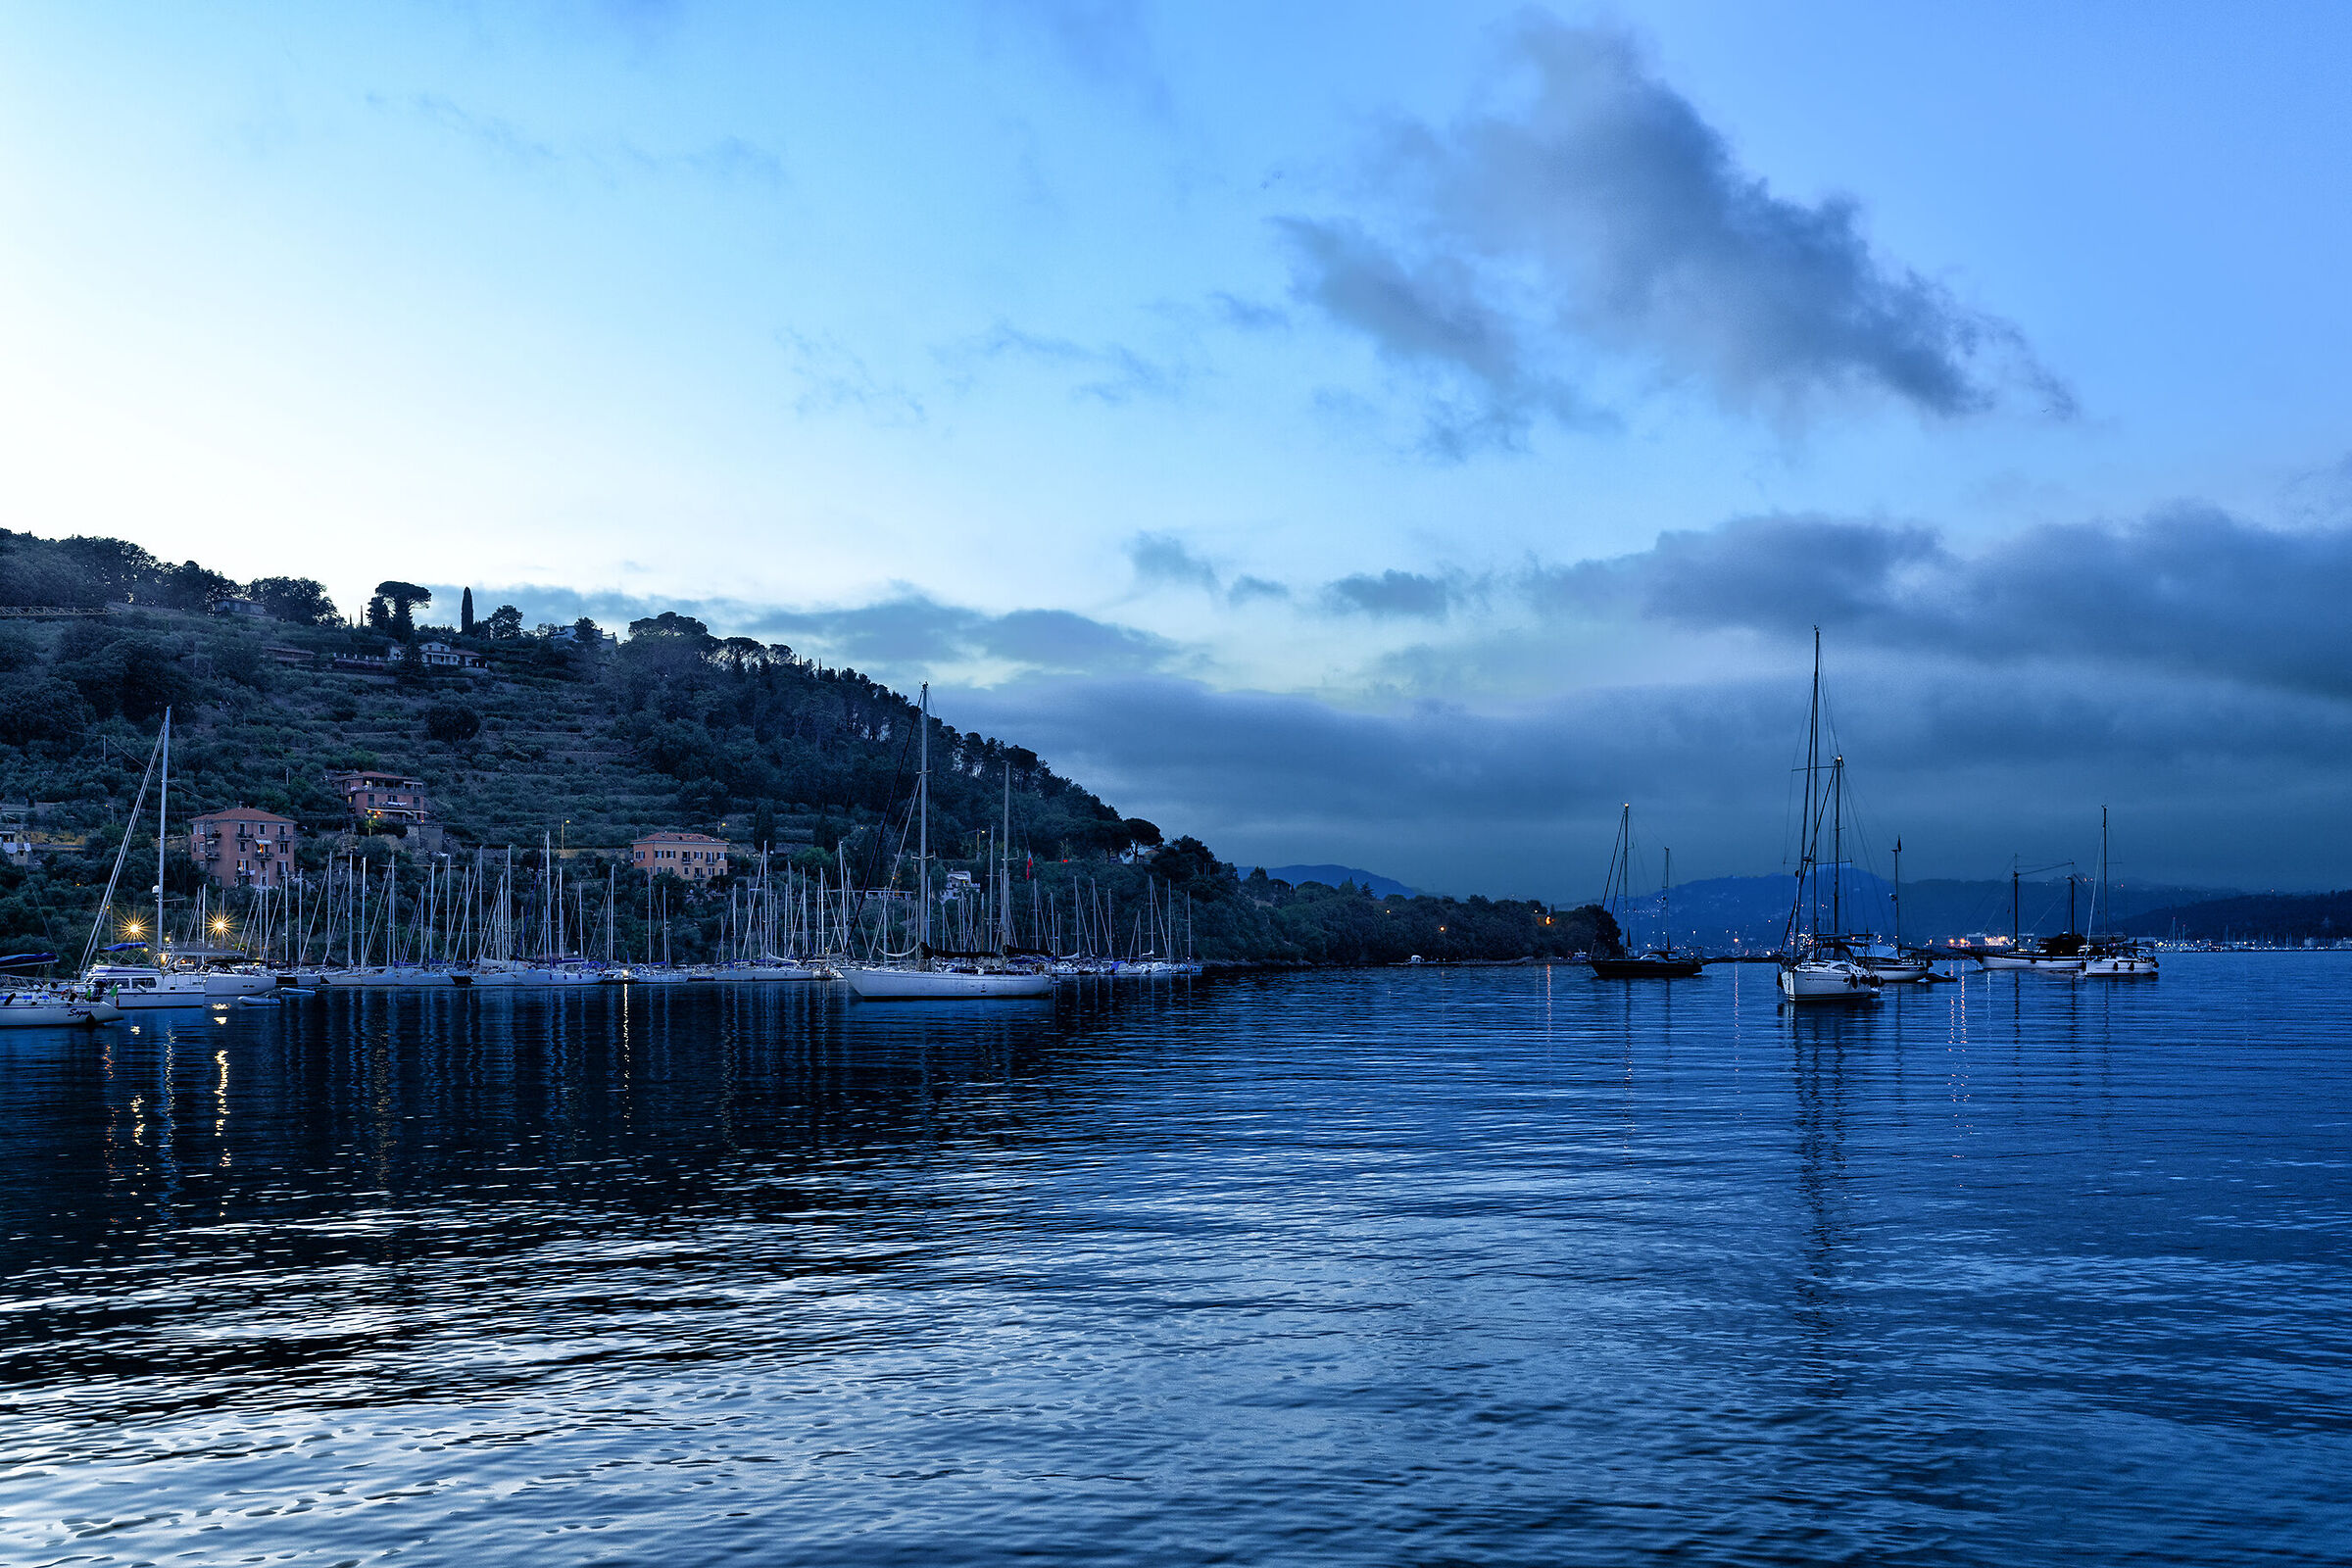 Blue hour from the marina of Grazie (SP)...